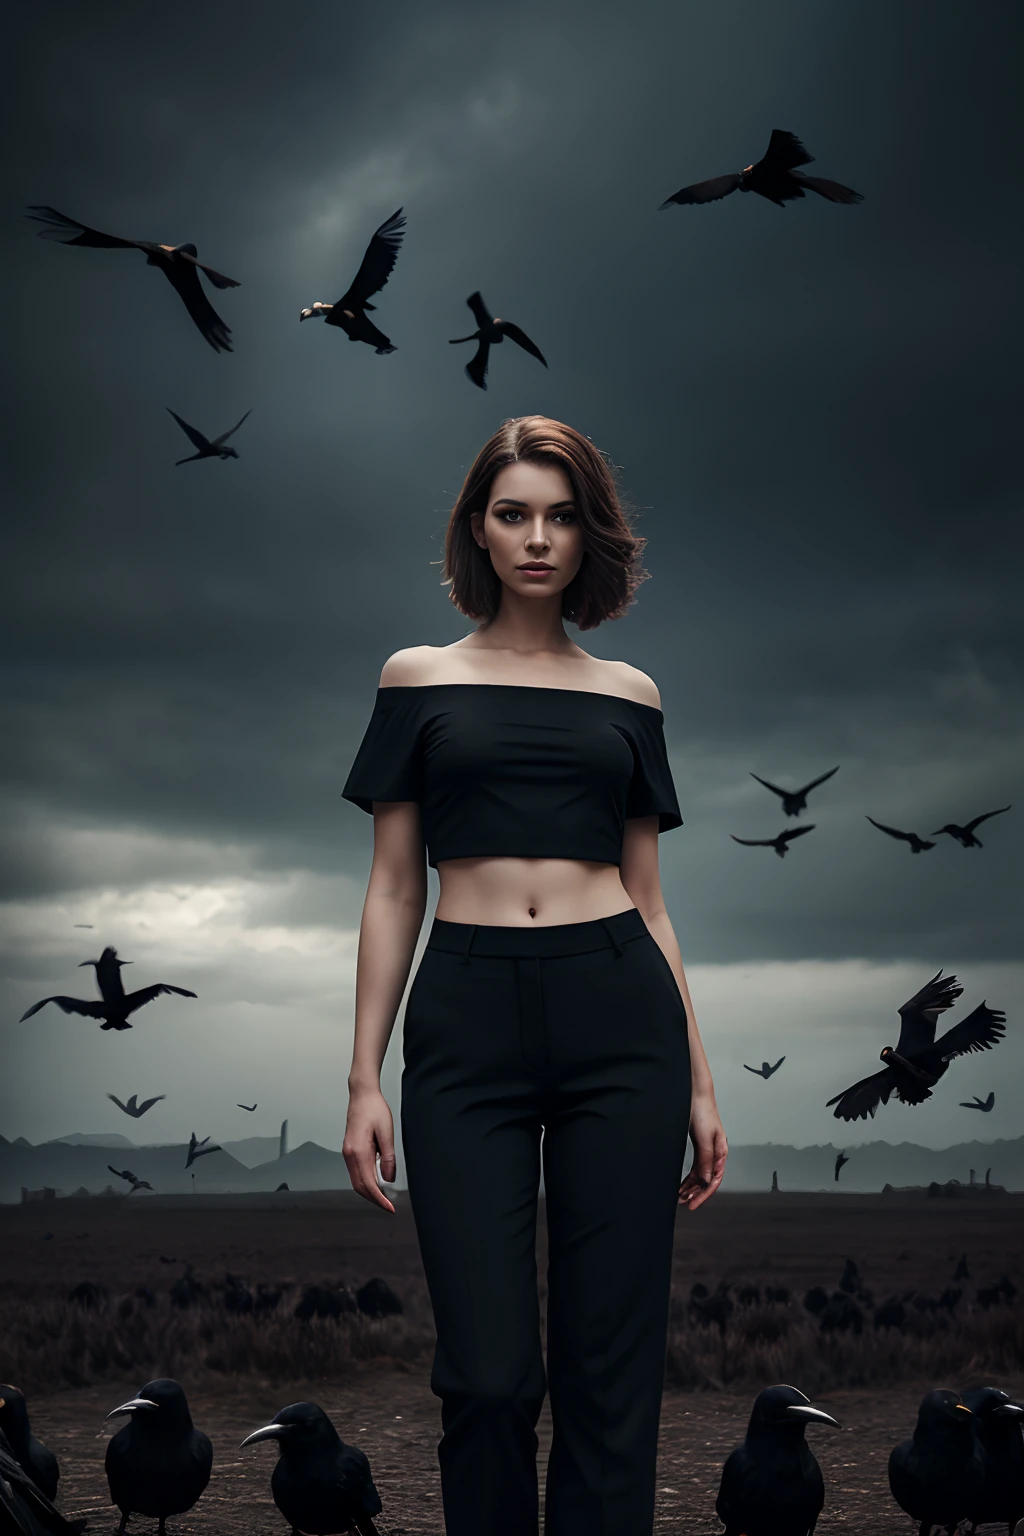 arafed woman in black top and pants standing in front of birds, flora borsi, among ravens, by Galen Dara, ravens stormy sky of foreboding, with a crow on her shoulder, photography alexey gurylev, swarms of ravens, crows, photography alexey kurylev, inspired by Richard Avedon, promo shot